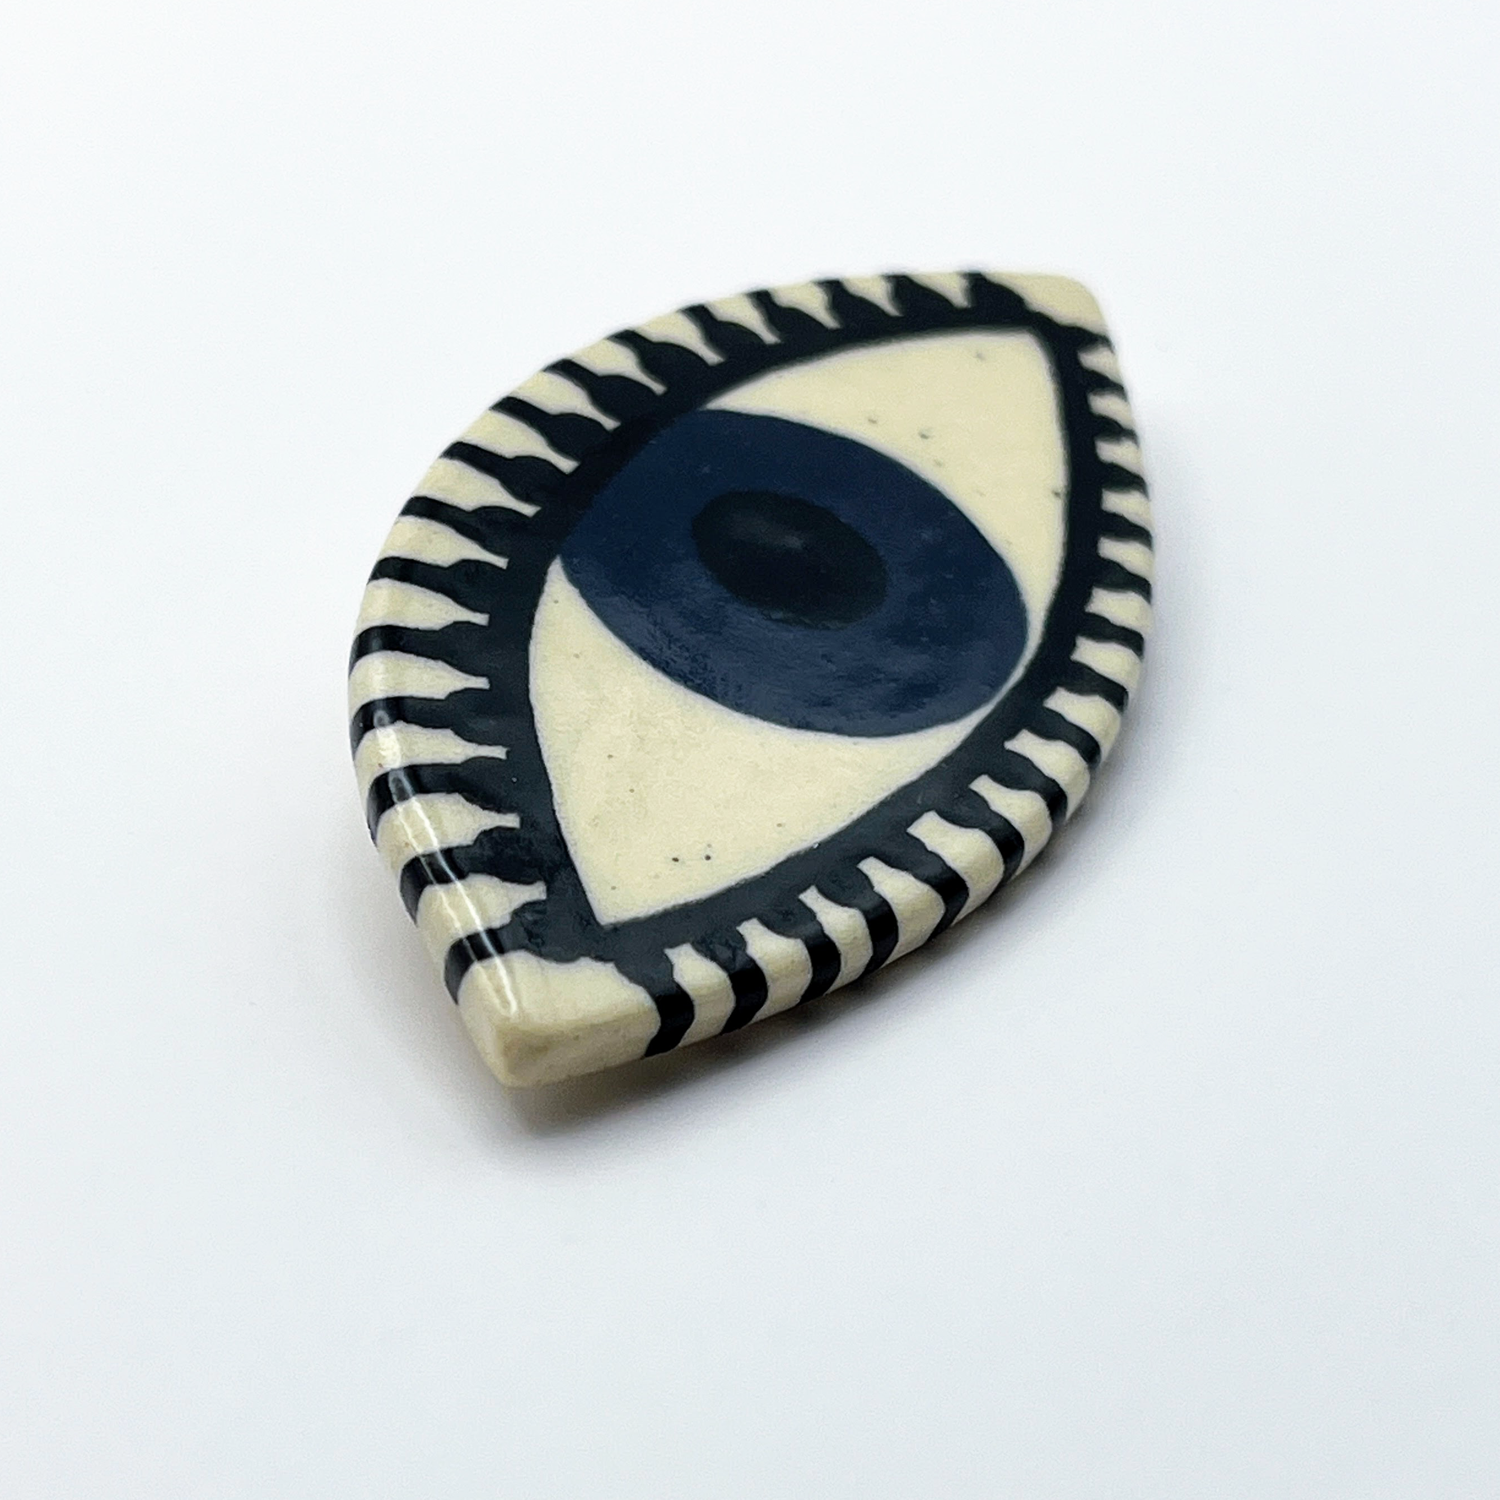 Here and Here: Blue Eye Brooch with Straight Lashes Product Image 2 of 2